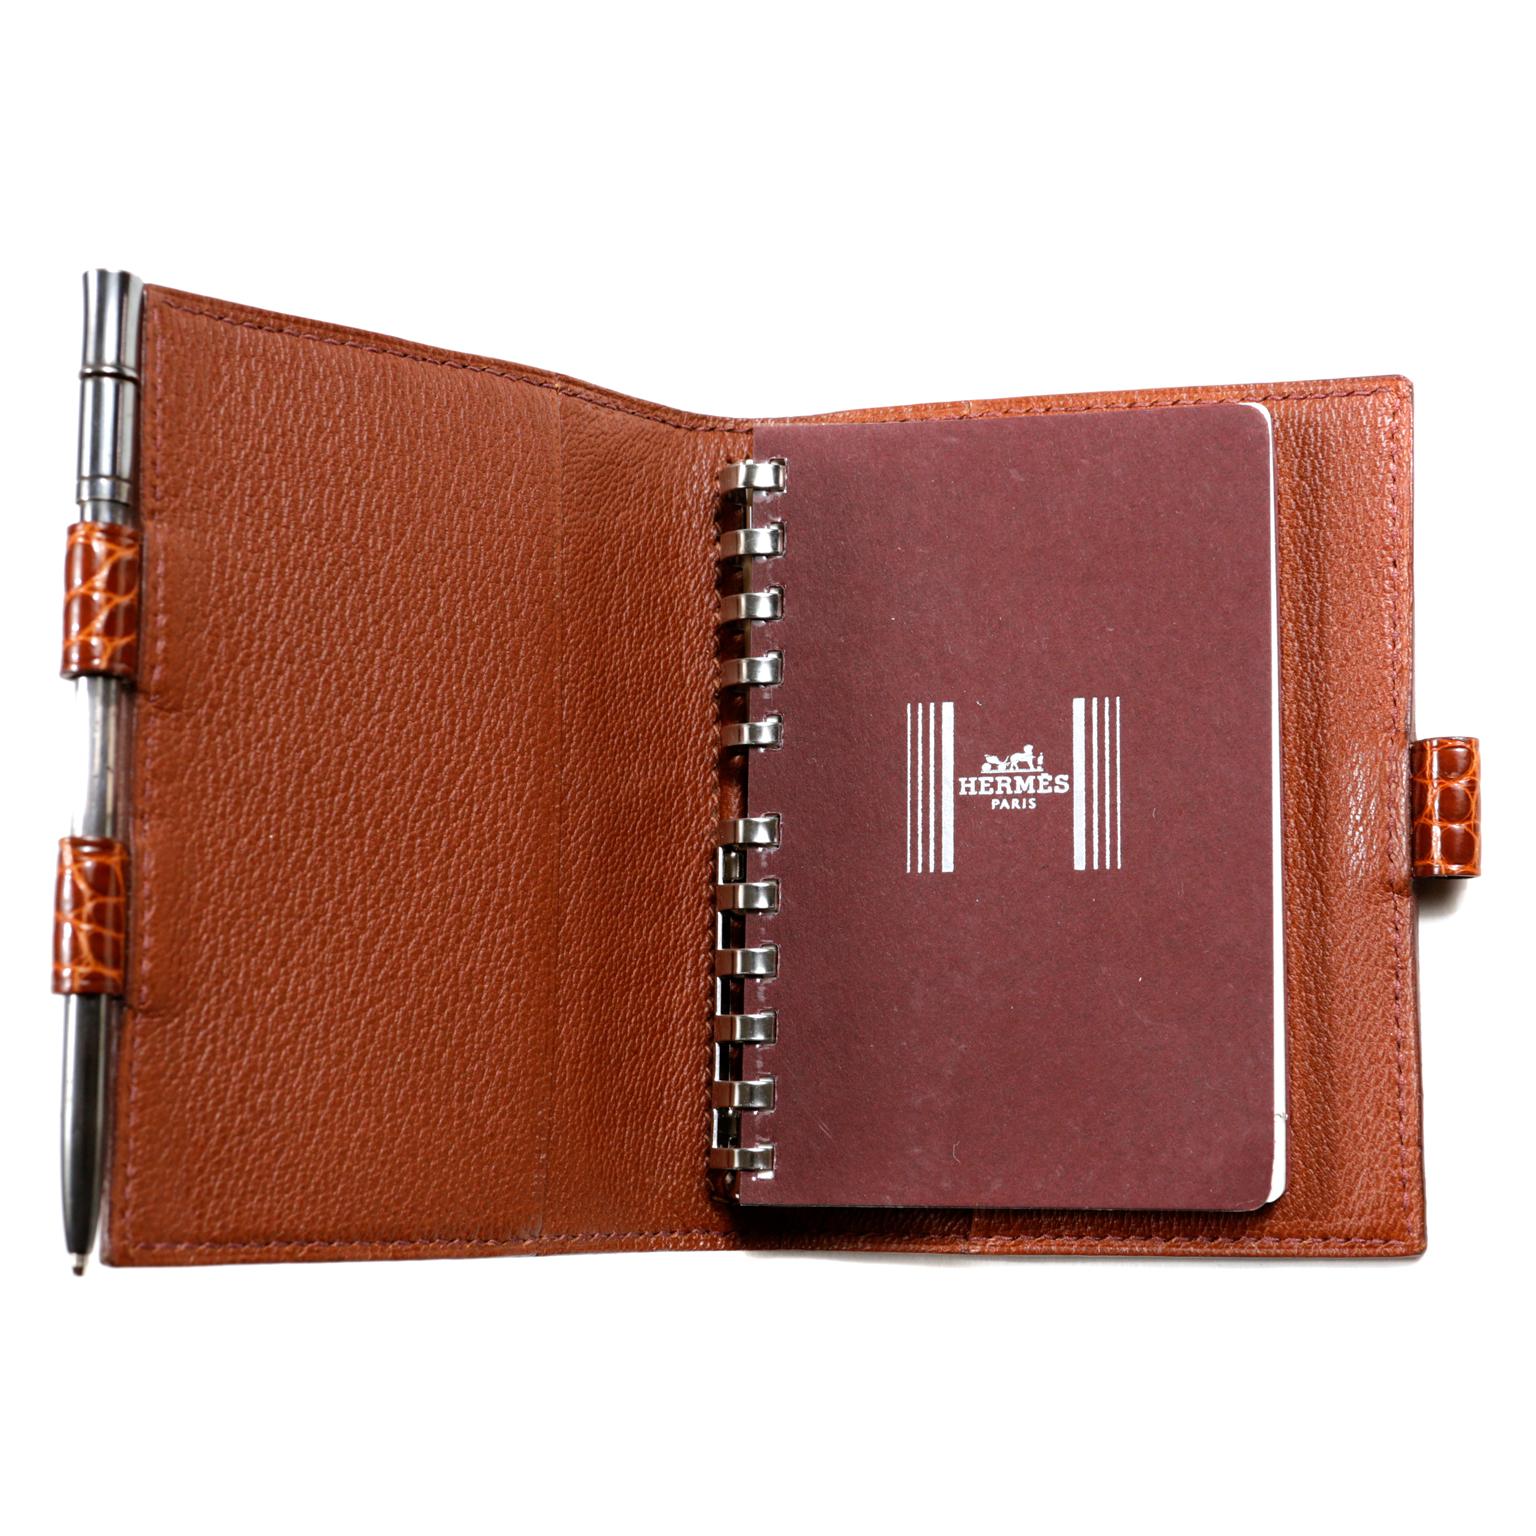  This authentic Hermès Classic Gold Alligator Day Planner is in new condition.   
Alligator is one of the world’s most exclusive leathers.  Only the finest skins are utilized highlighting every detail beautifully. Diary and pen included.  Made in